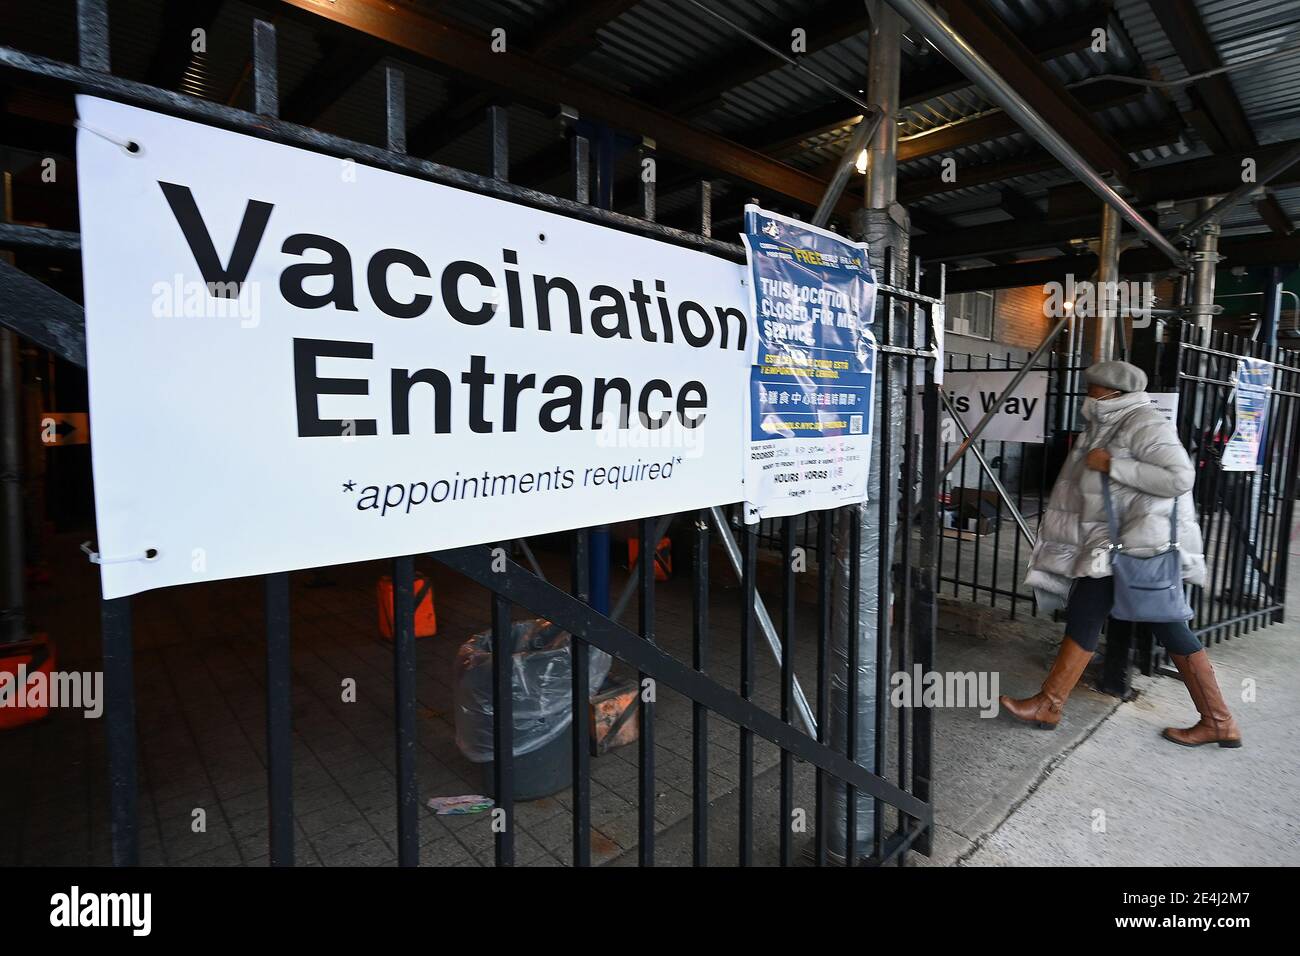 A woman enters a COVID-19 Vaccination Hub in the Elmhurst section of the Queens borough of New York City, NY, January 23, 2021. New York City has ordered 15 if its COVID-19 Vaccinations hubs closed and appointments cancelled due to a shortage of the COVID-19 vaccine; the United States recently surpassed 400,000 deaths due to Coronavirus infections.  (Photo by Anthony Behar/Sipa USA) Stock Photo